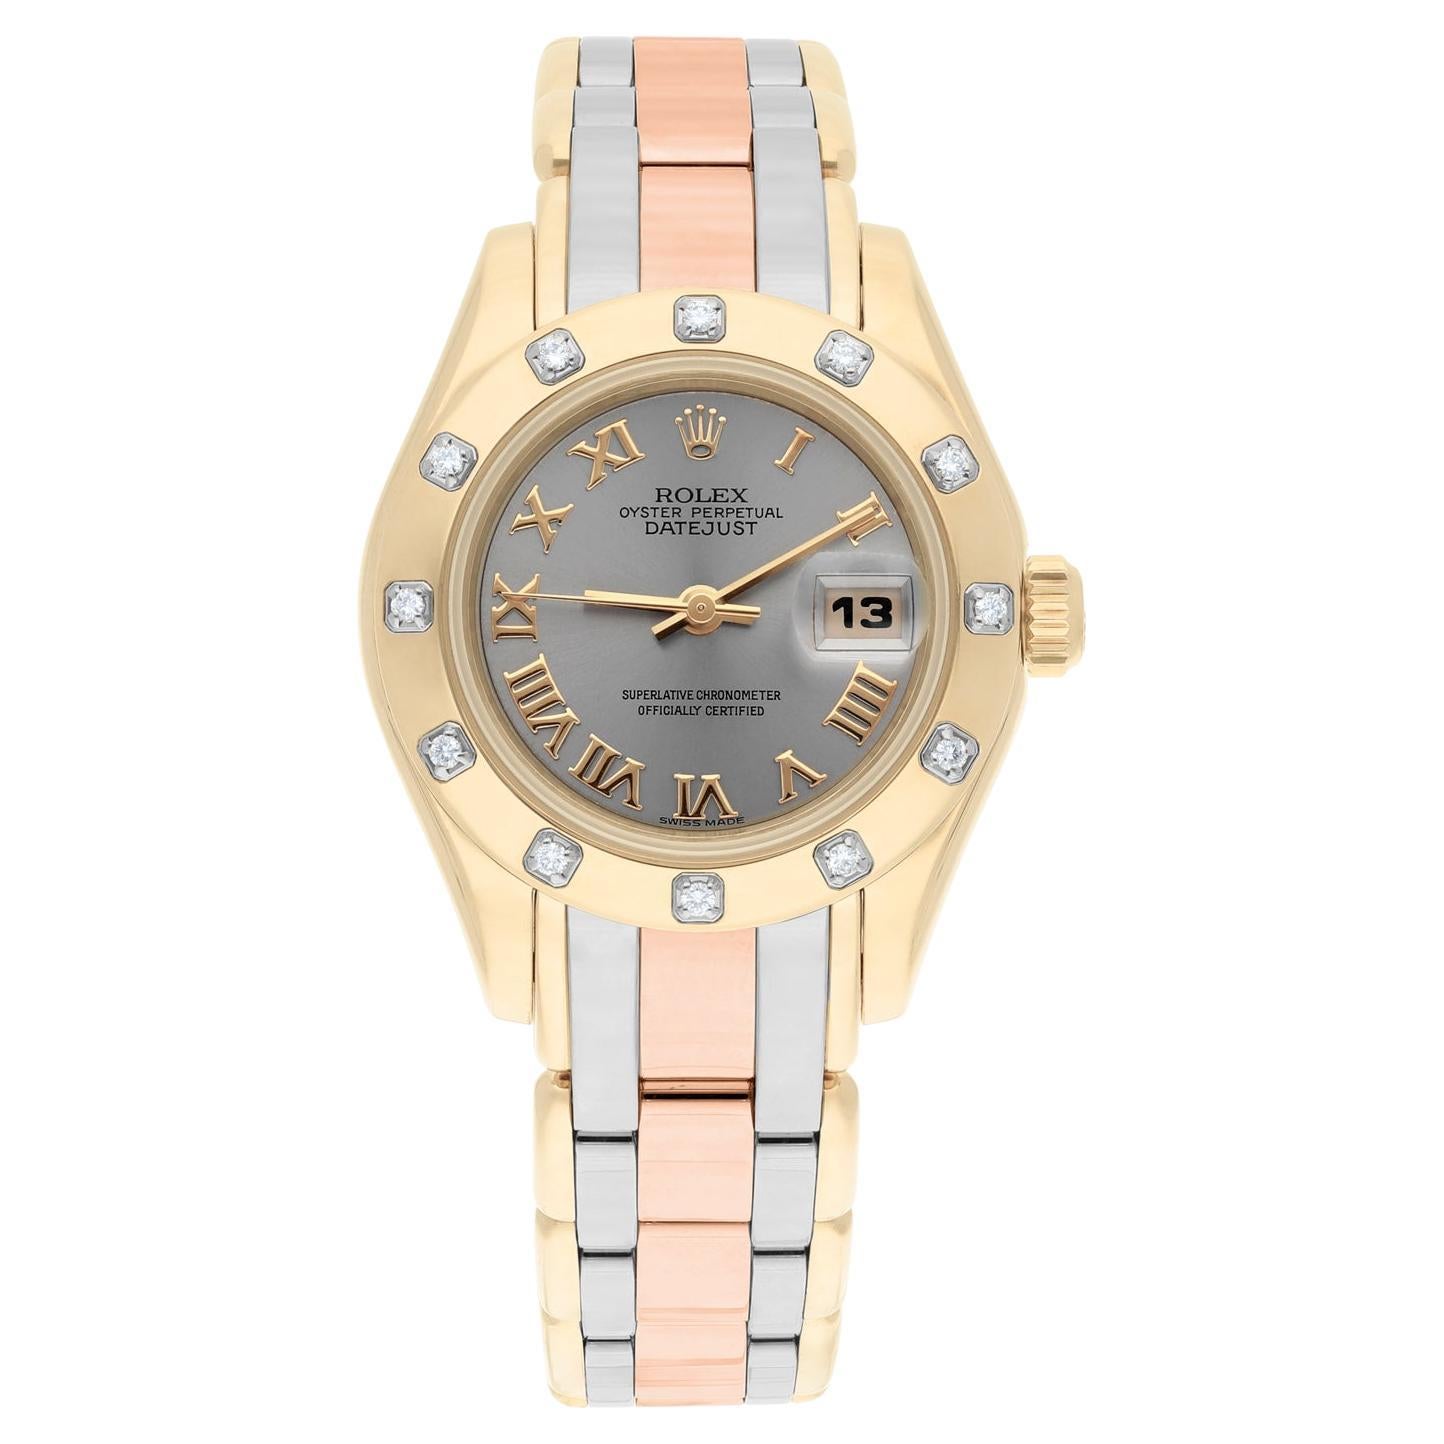 This exquisite Rolex Tridor Masterpiece ladies watch is a true statement piece. Crafted from 18K rose, yellow, and white gold, it exudes luxury and sophistication. The round case measures 29mm in diameter with a case thickness of 10.5mm, and